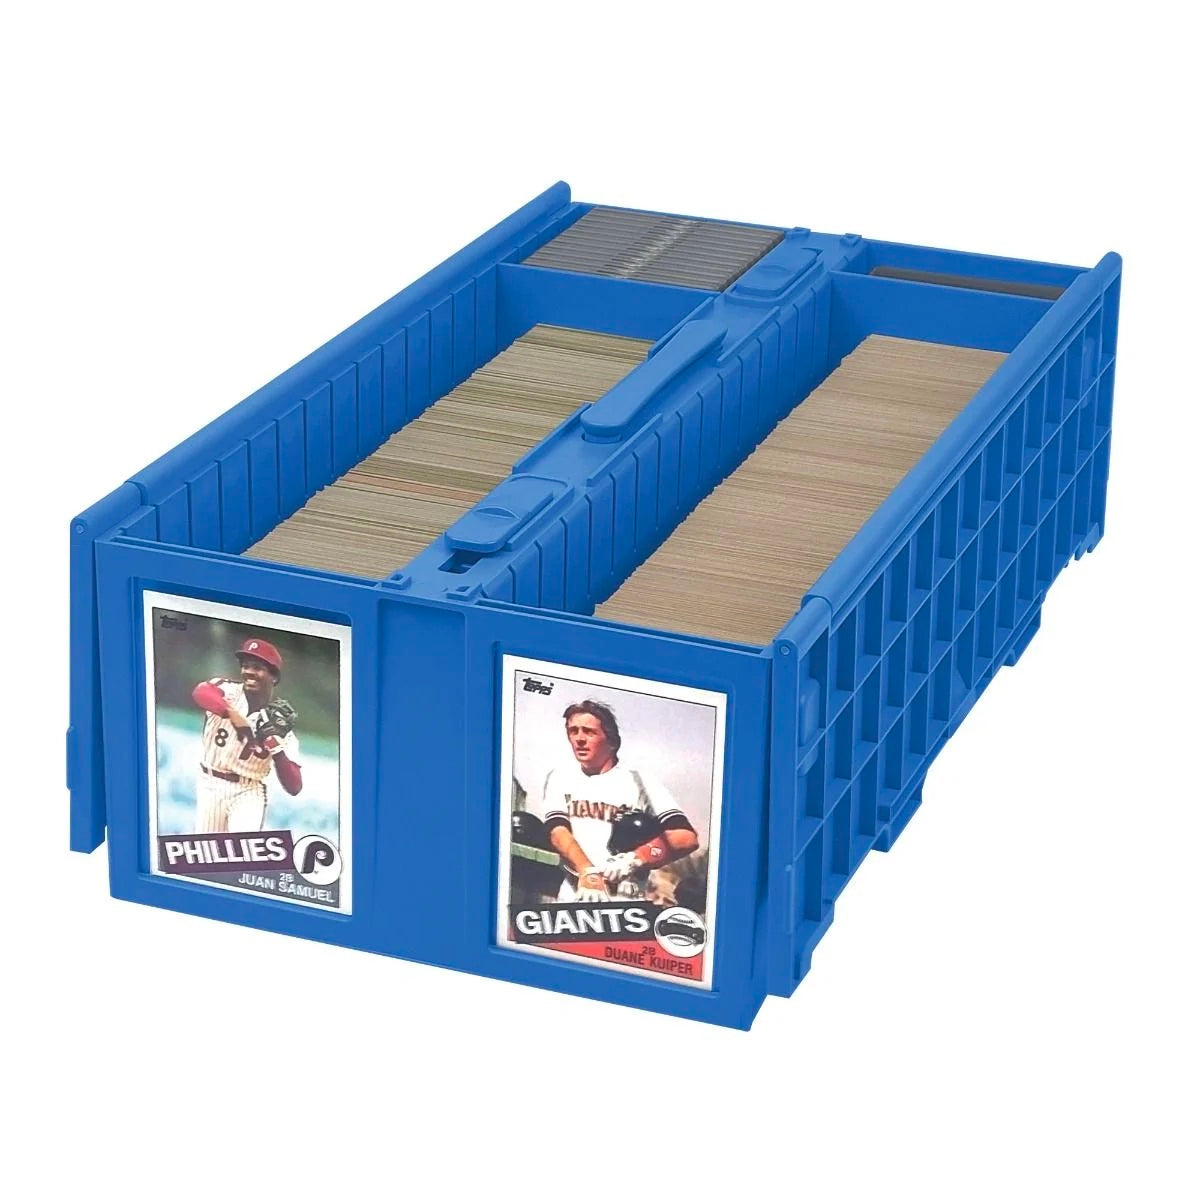 Card Storage Box in blue color fits 1600 sports cards - Open Box Lid Showcasing sports cards (1-ccb-1600-blu)